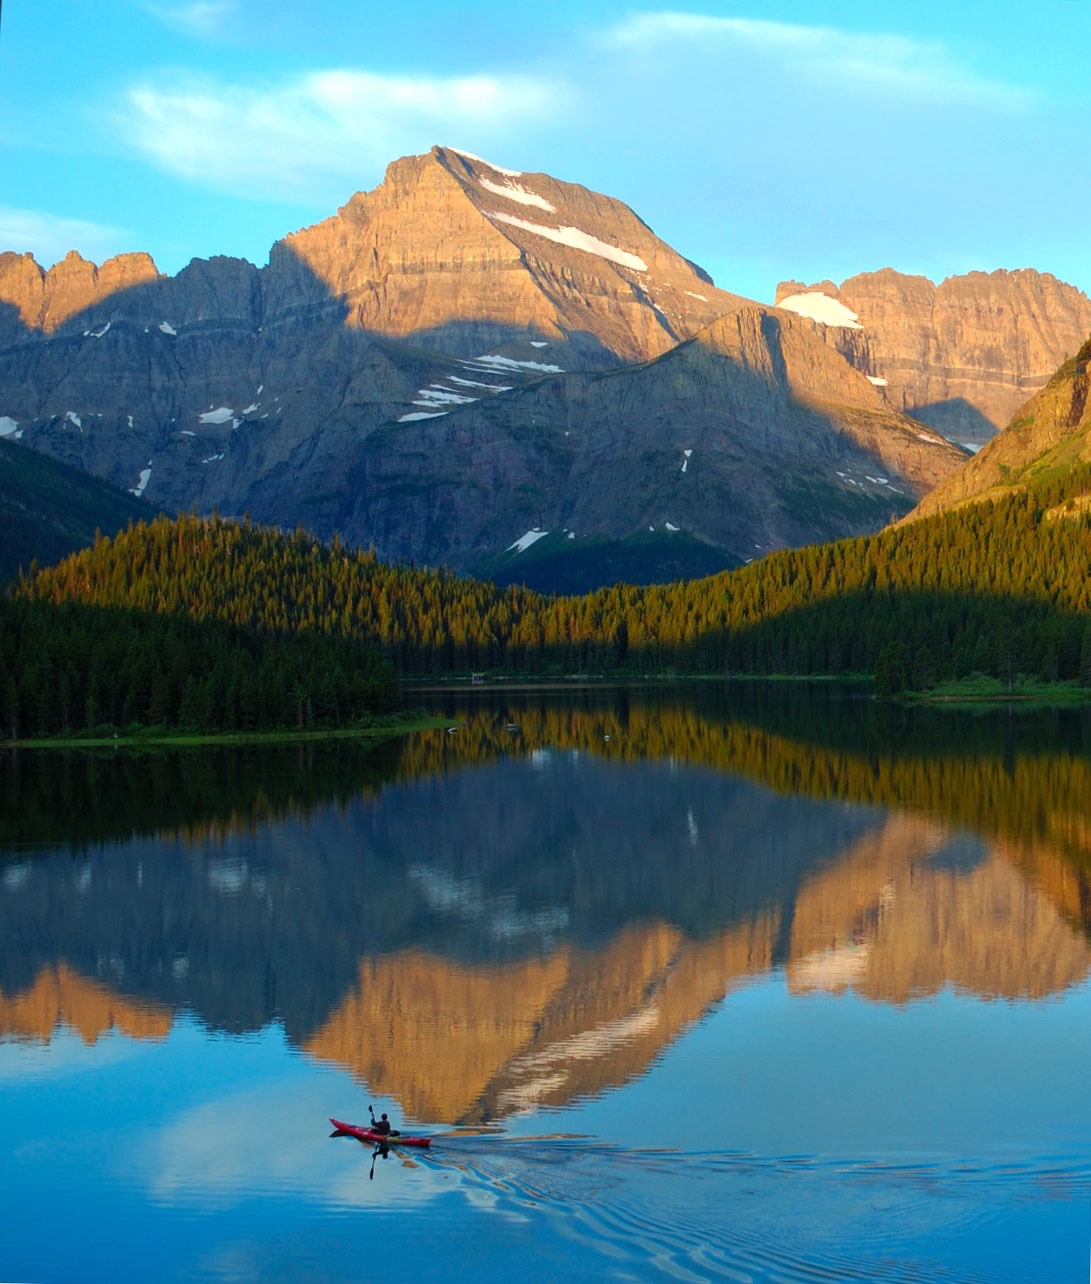 Swiftcurrent Lake in Glacier National Park mirrors Mount Gould and the Continental Divide